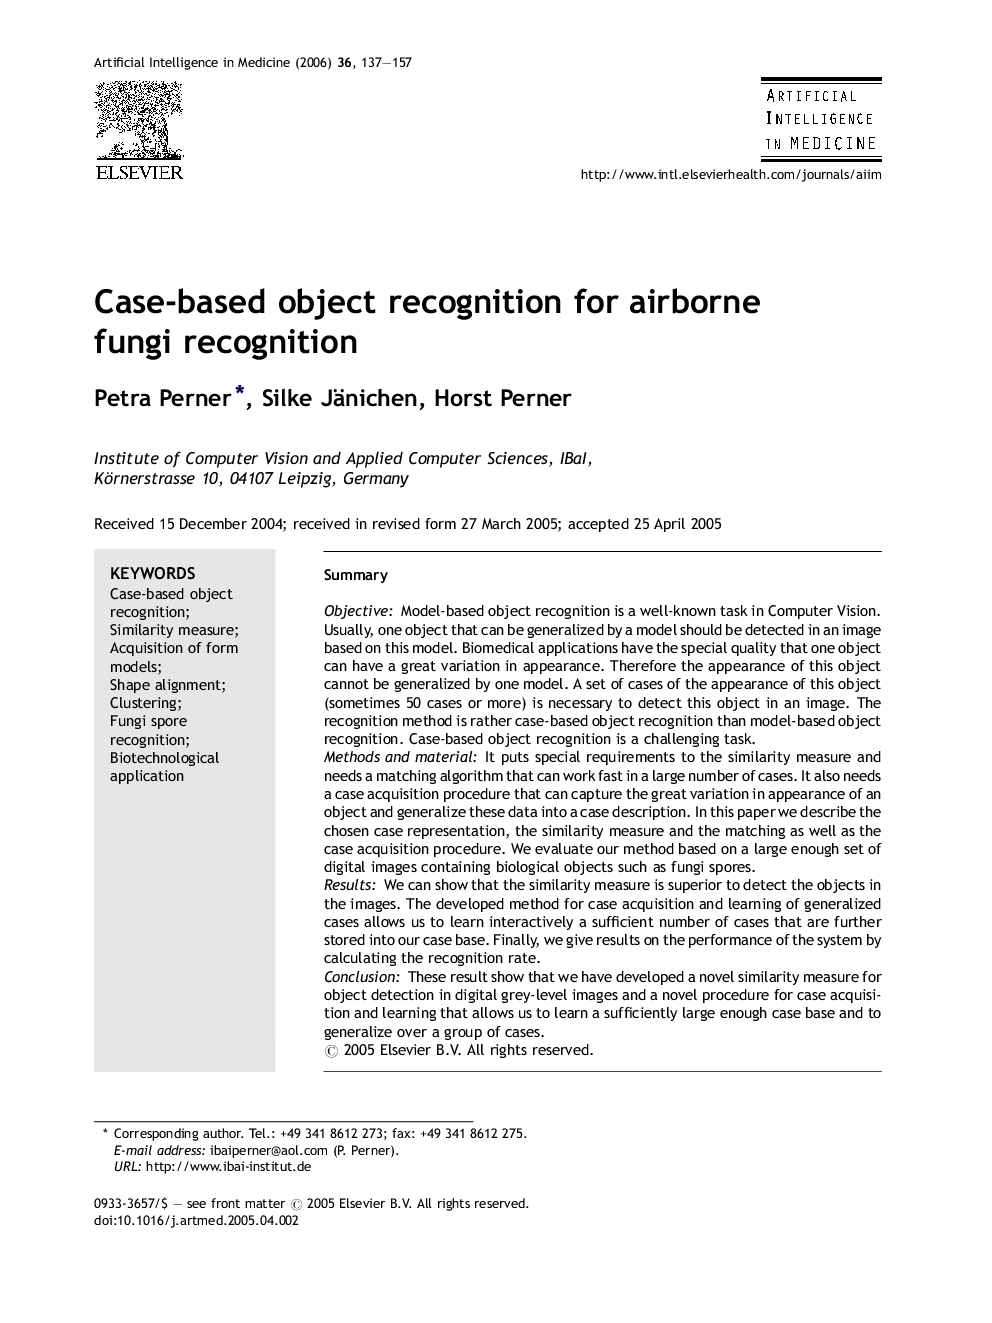 Case-based object recognition for airborne fungi recognition